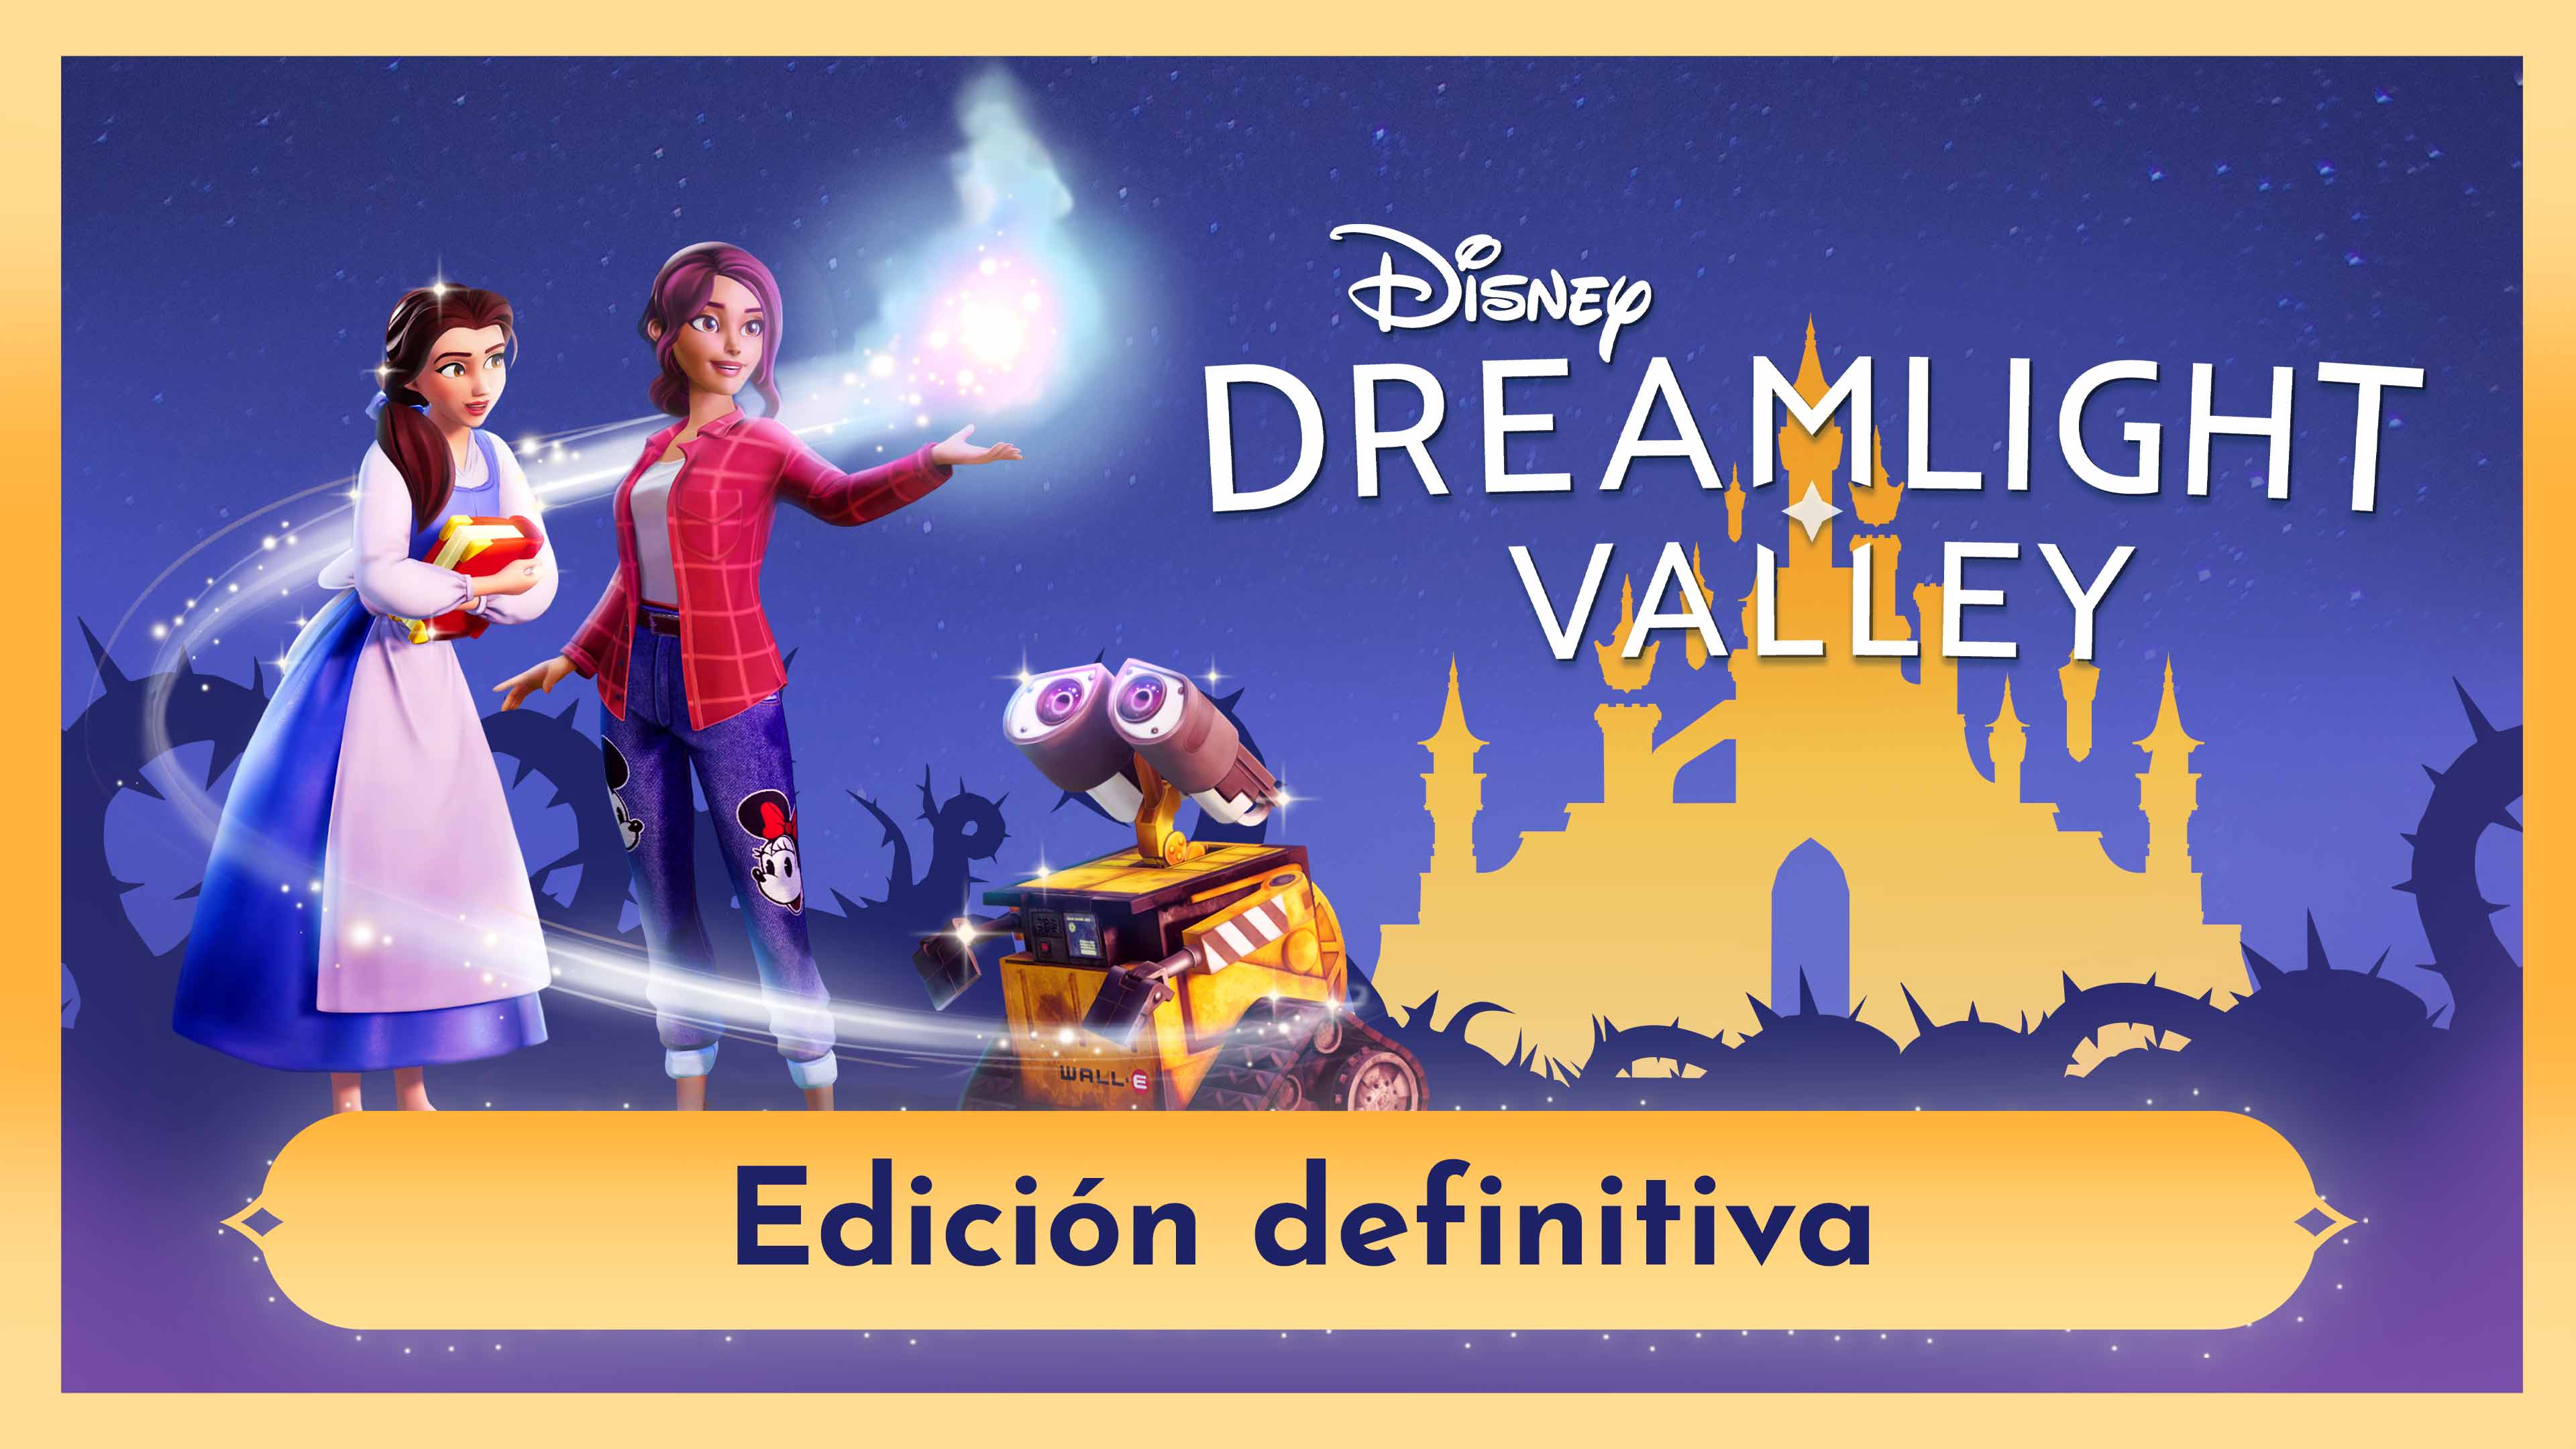 Disney Dreamlight Valley PS4 PS5 Games PlayStation (US) lupon.gov.ph